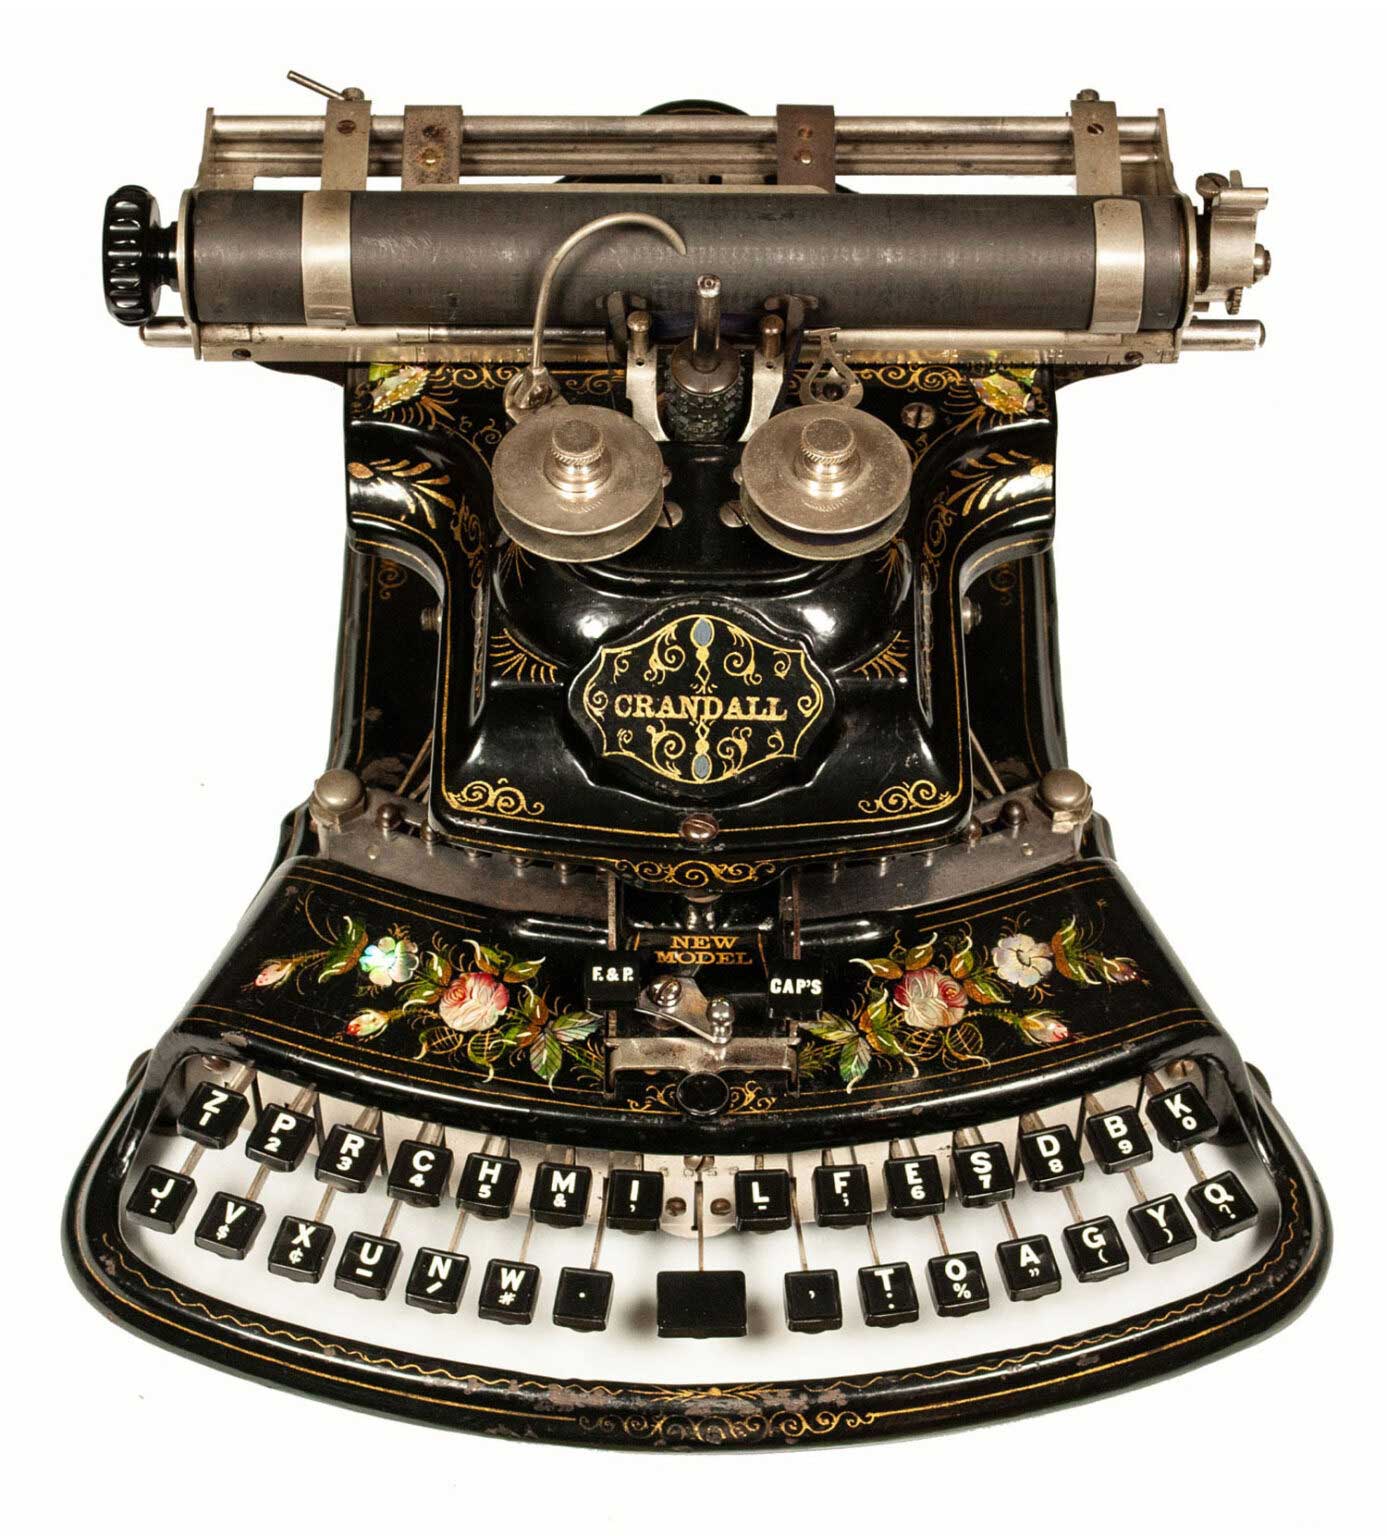 A Crandall New Model typewriter from 1887